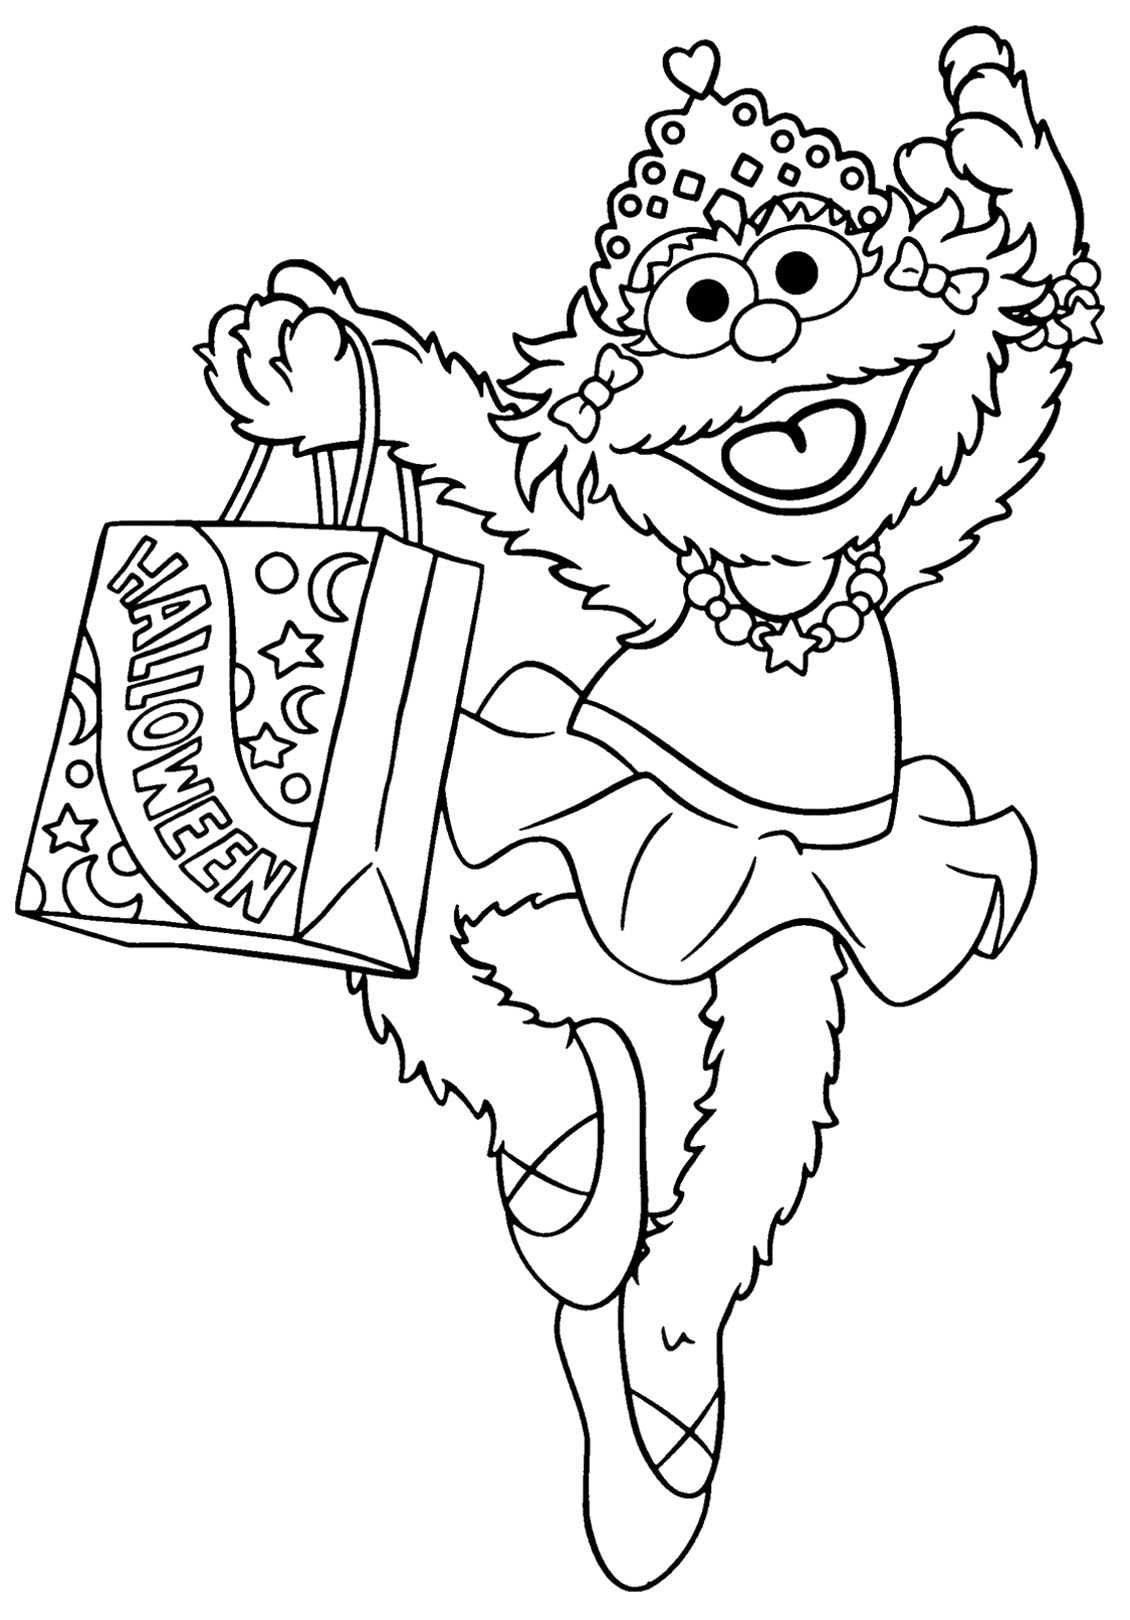 Sesame Street coloring pages to print for kids - Sesame Street Kids ...